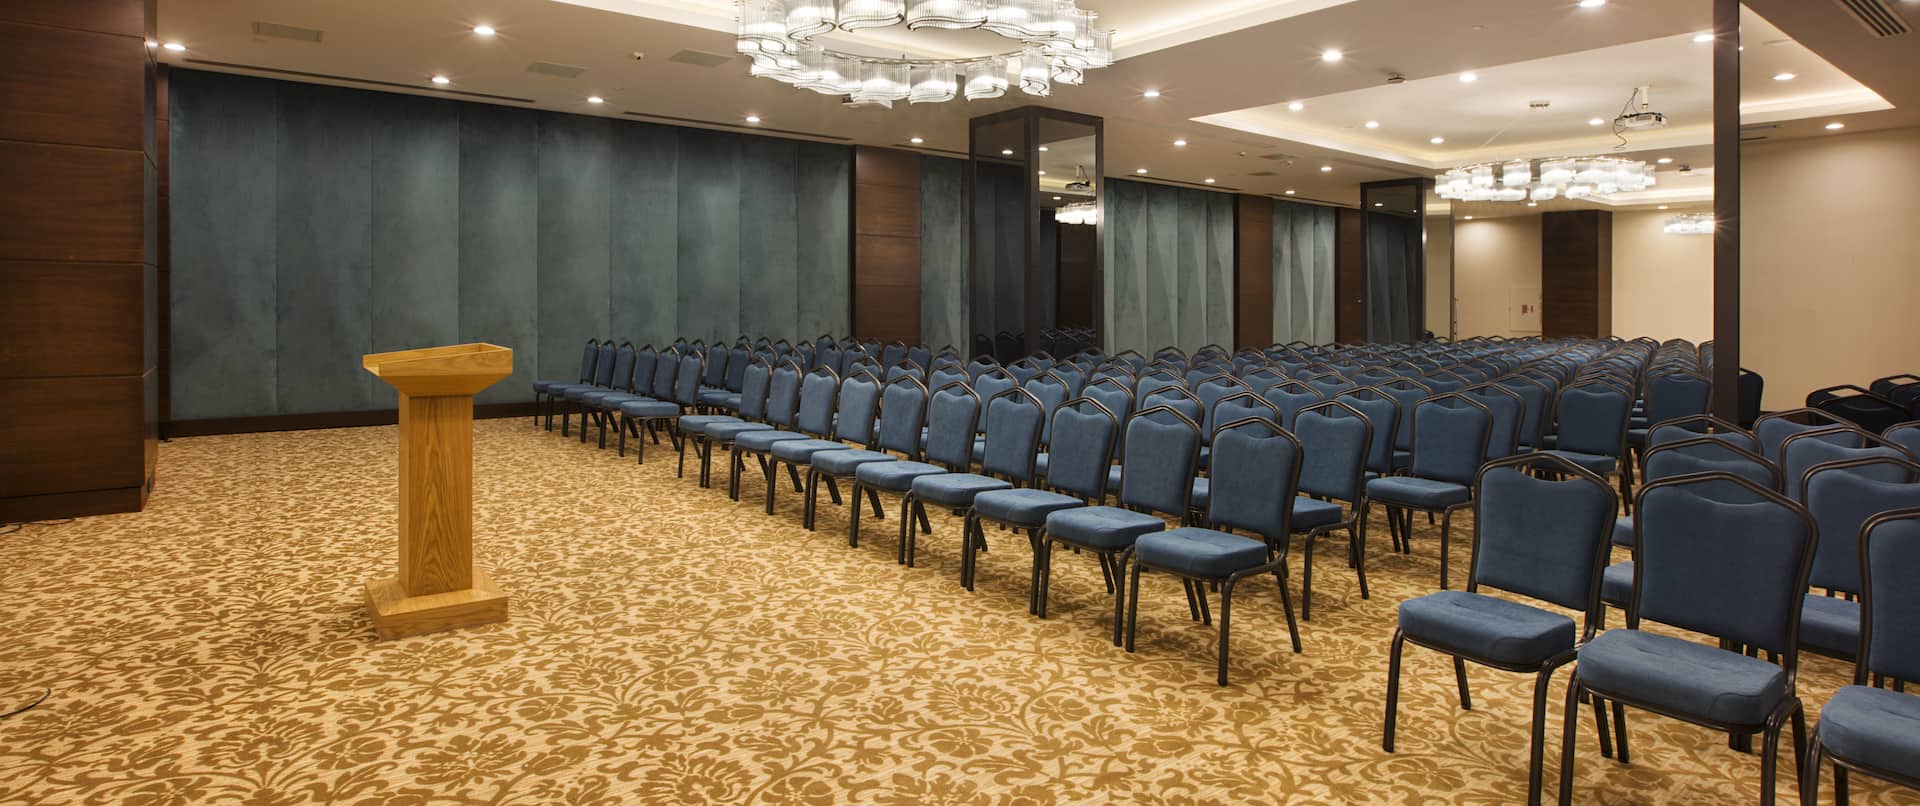 Rosa Conference Room Arranged Theater Style With Rows of Blue Chairs Facing Podium